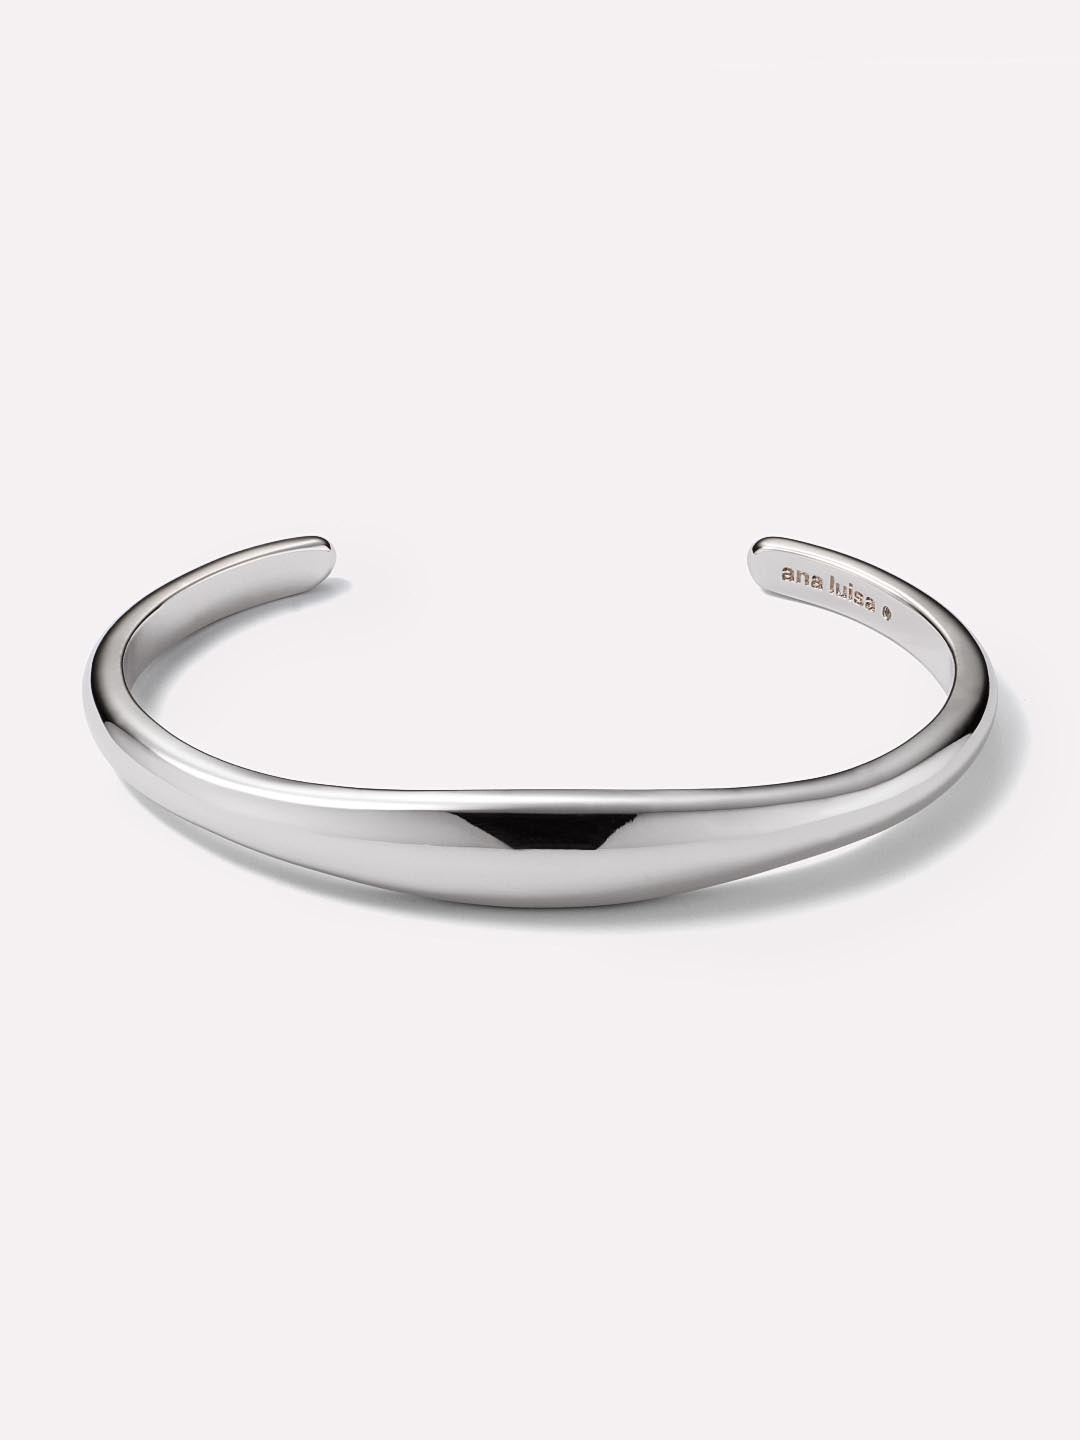 Sterling Silver Cuff Bangle Bracelet in Kolkata at best price by Manik  Chand Jewellers & Sons Pvt Ltd - Justdial